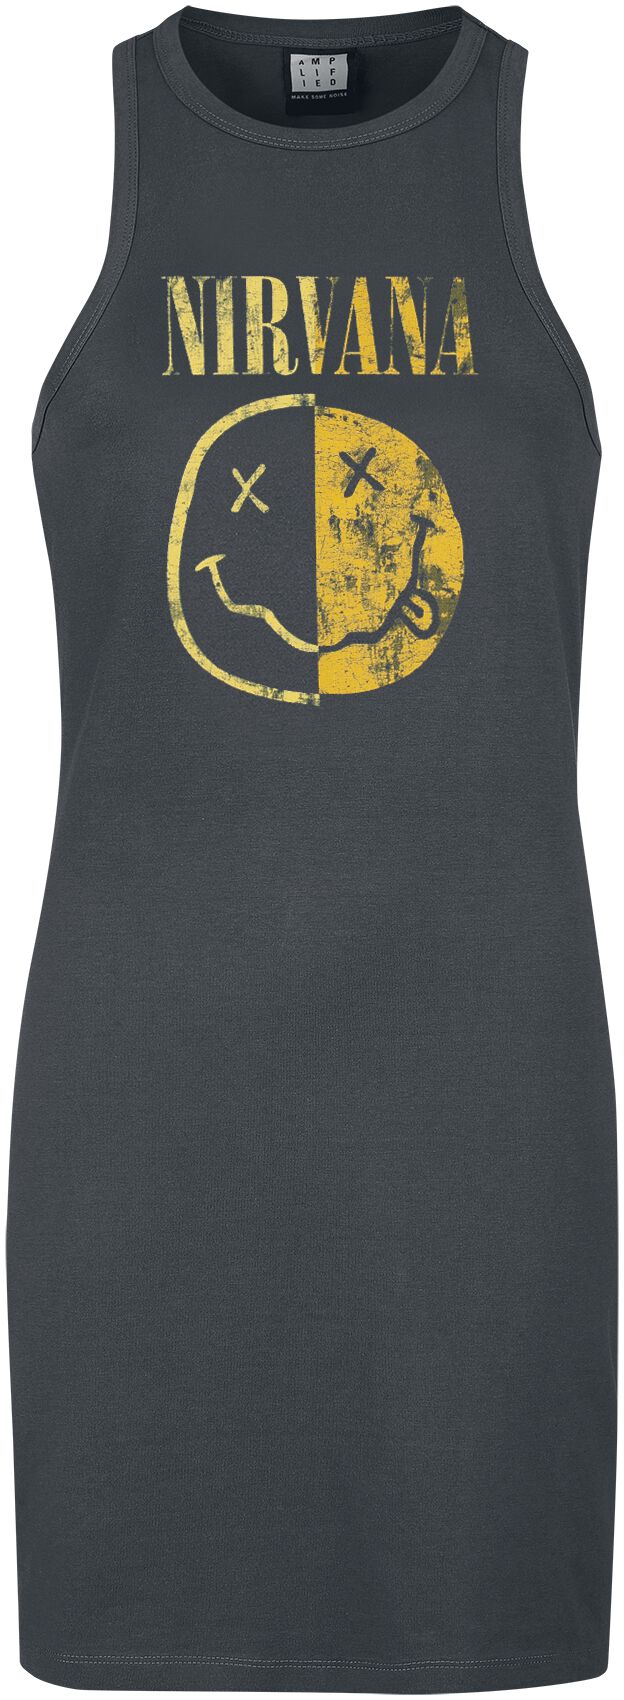 Nirvana Amplified Collection - Spliced Smiley Kurzes Kleid charcoal in XL